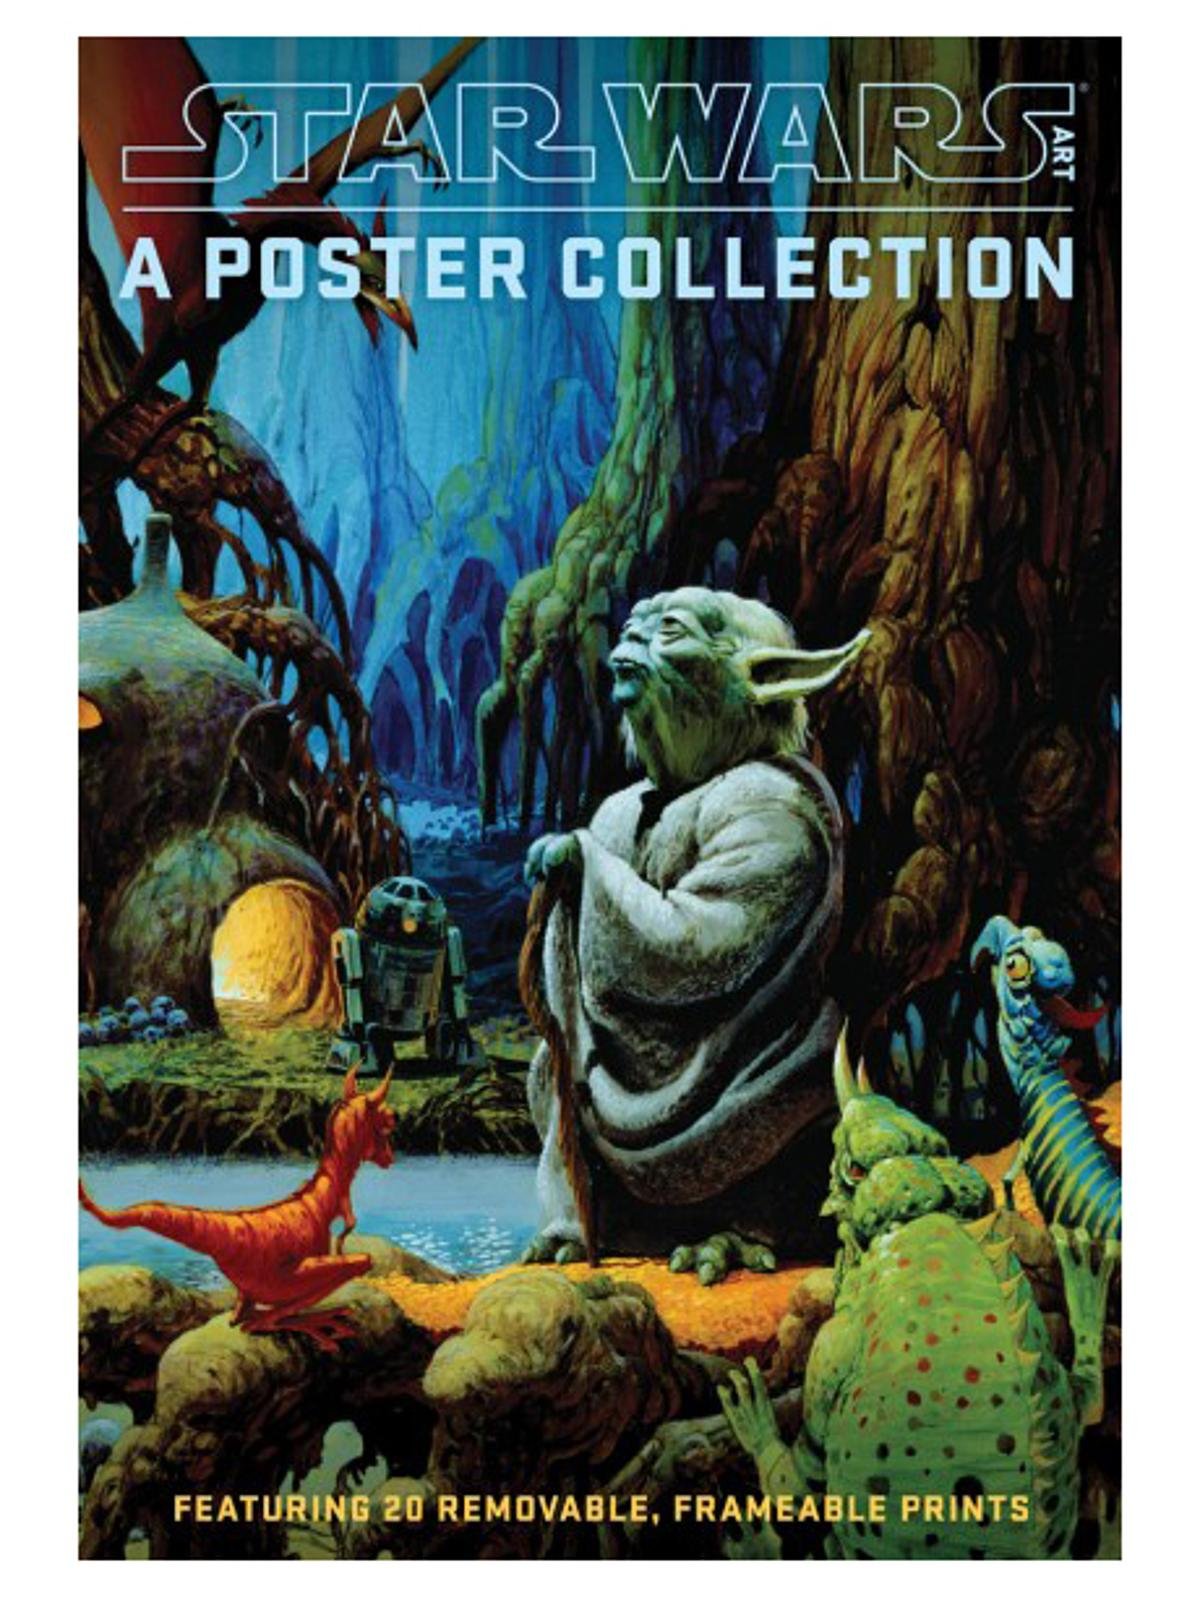 Abrams Books - Star Wars Art: A Poster Collection